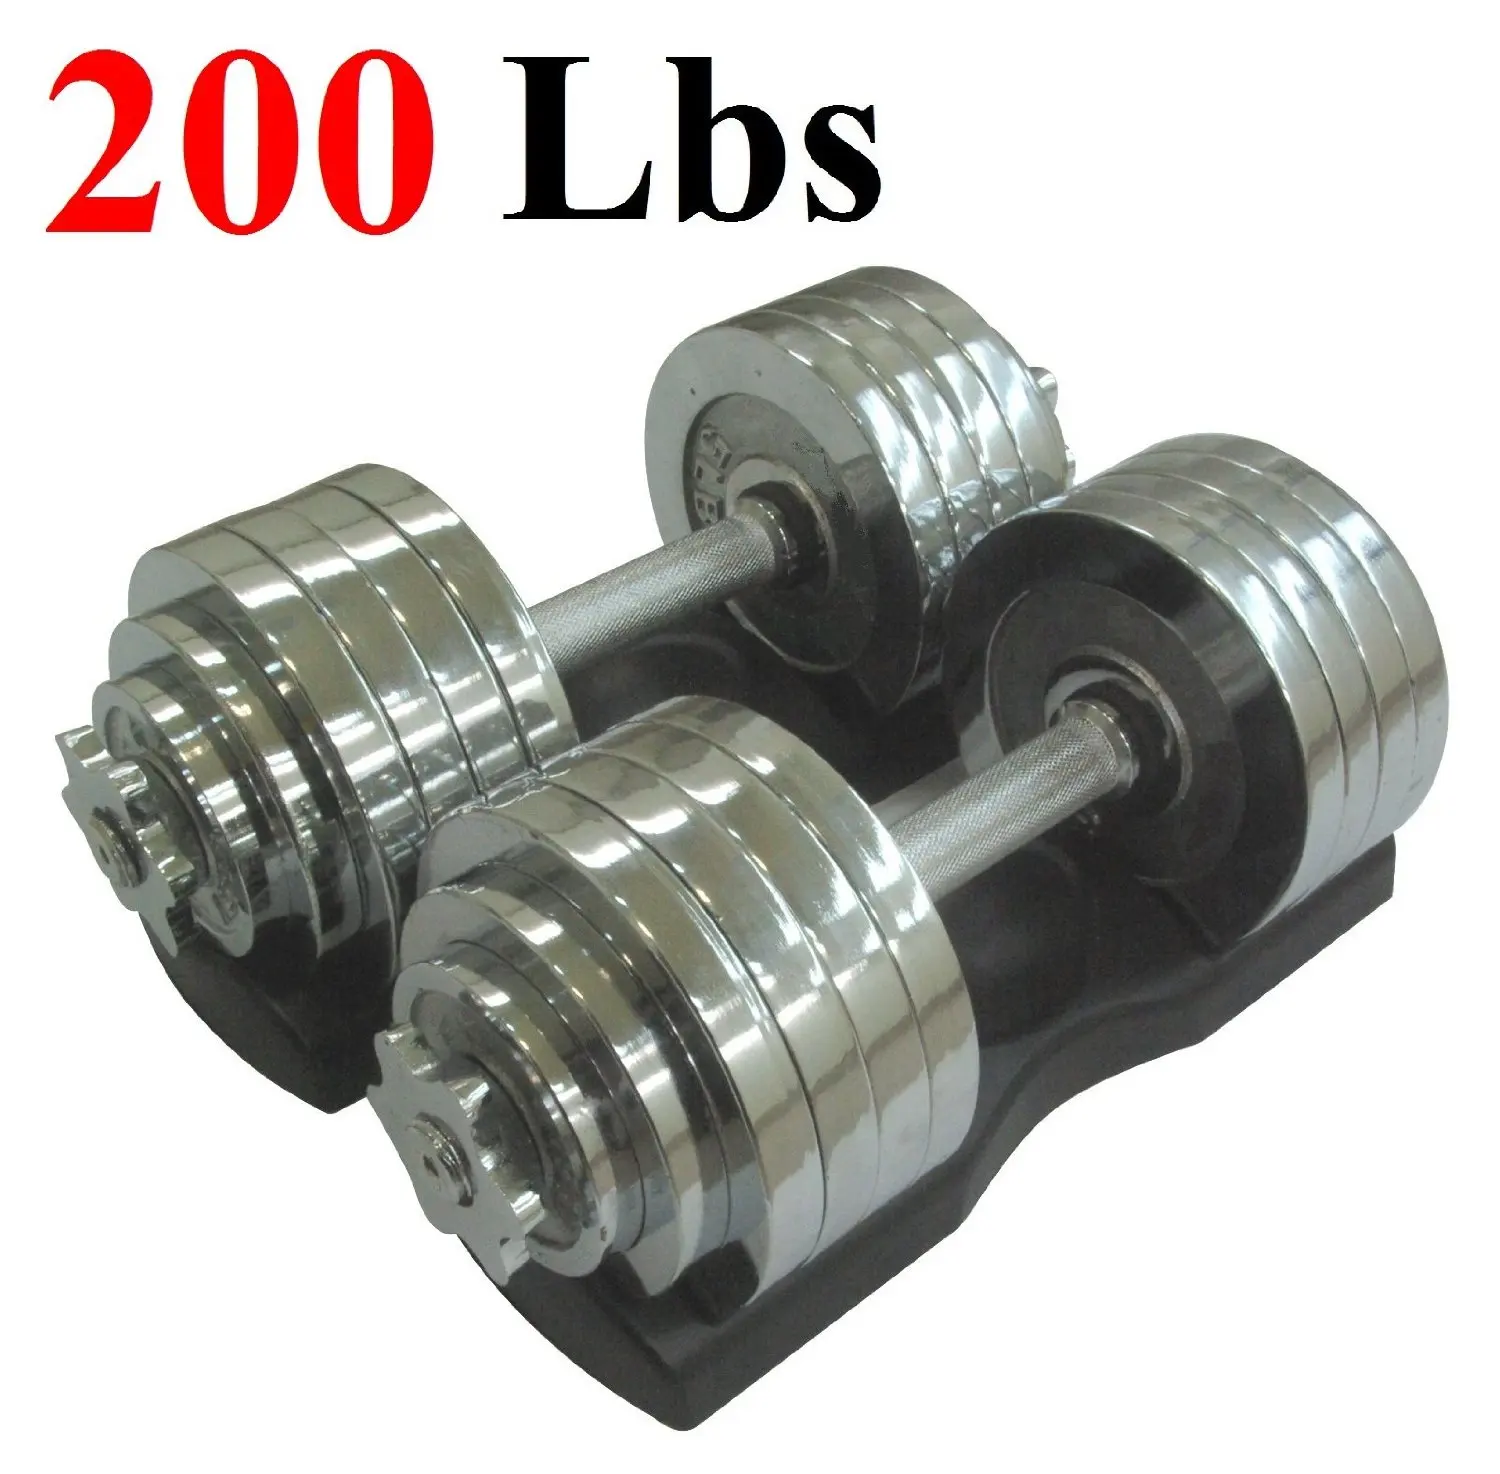 One Pair of Adjustable Dumbbells Chrome Plated Metal Total 200 Lbs (2 X 100...